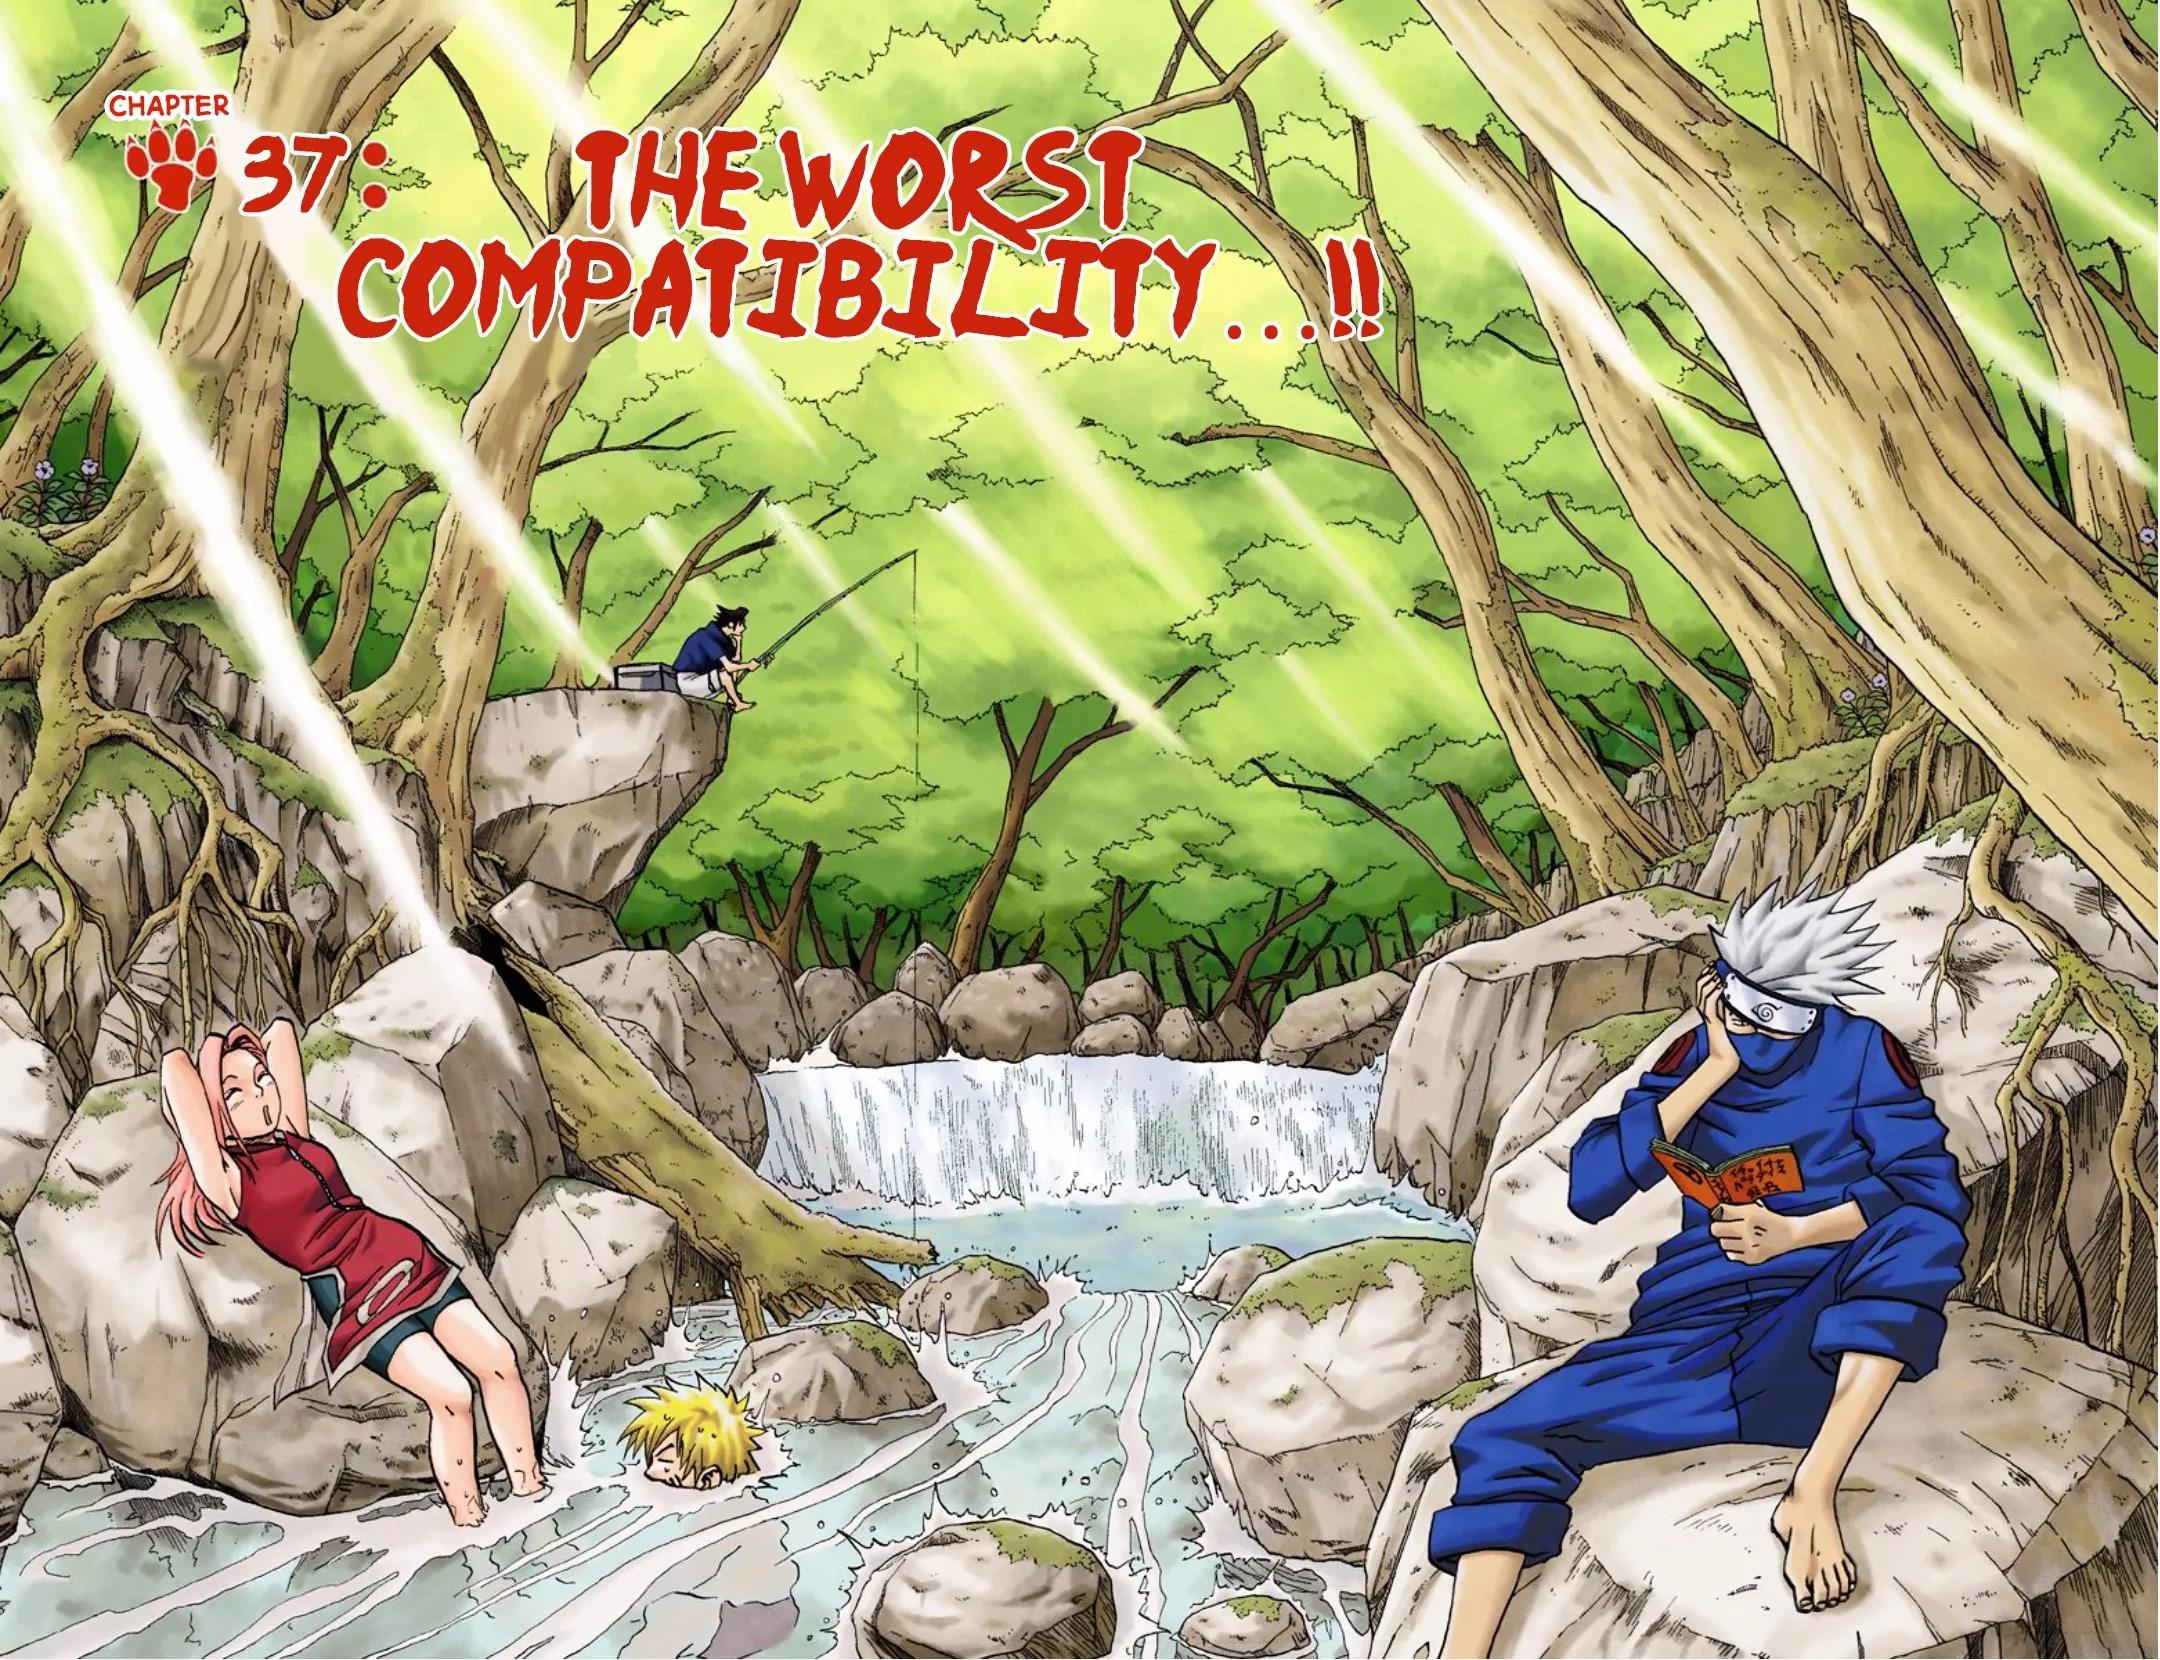 Naruto - Full Color Vol.5 Chapter 37: